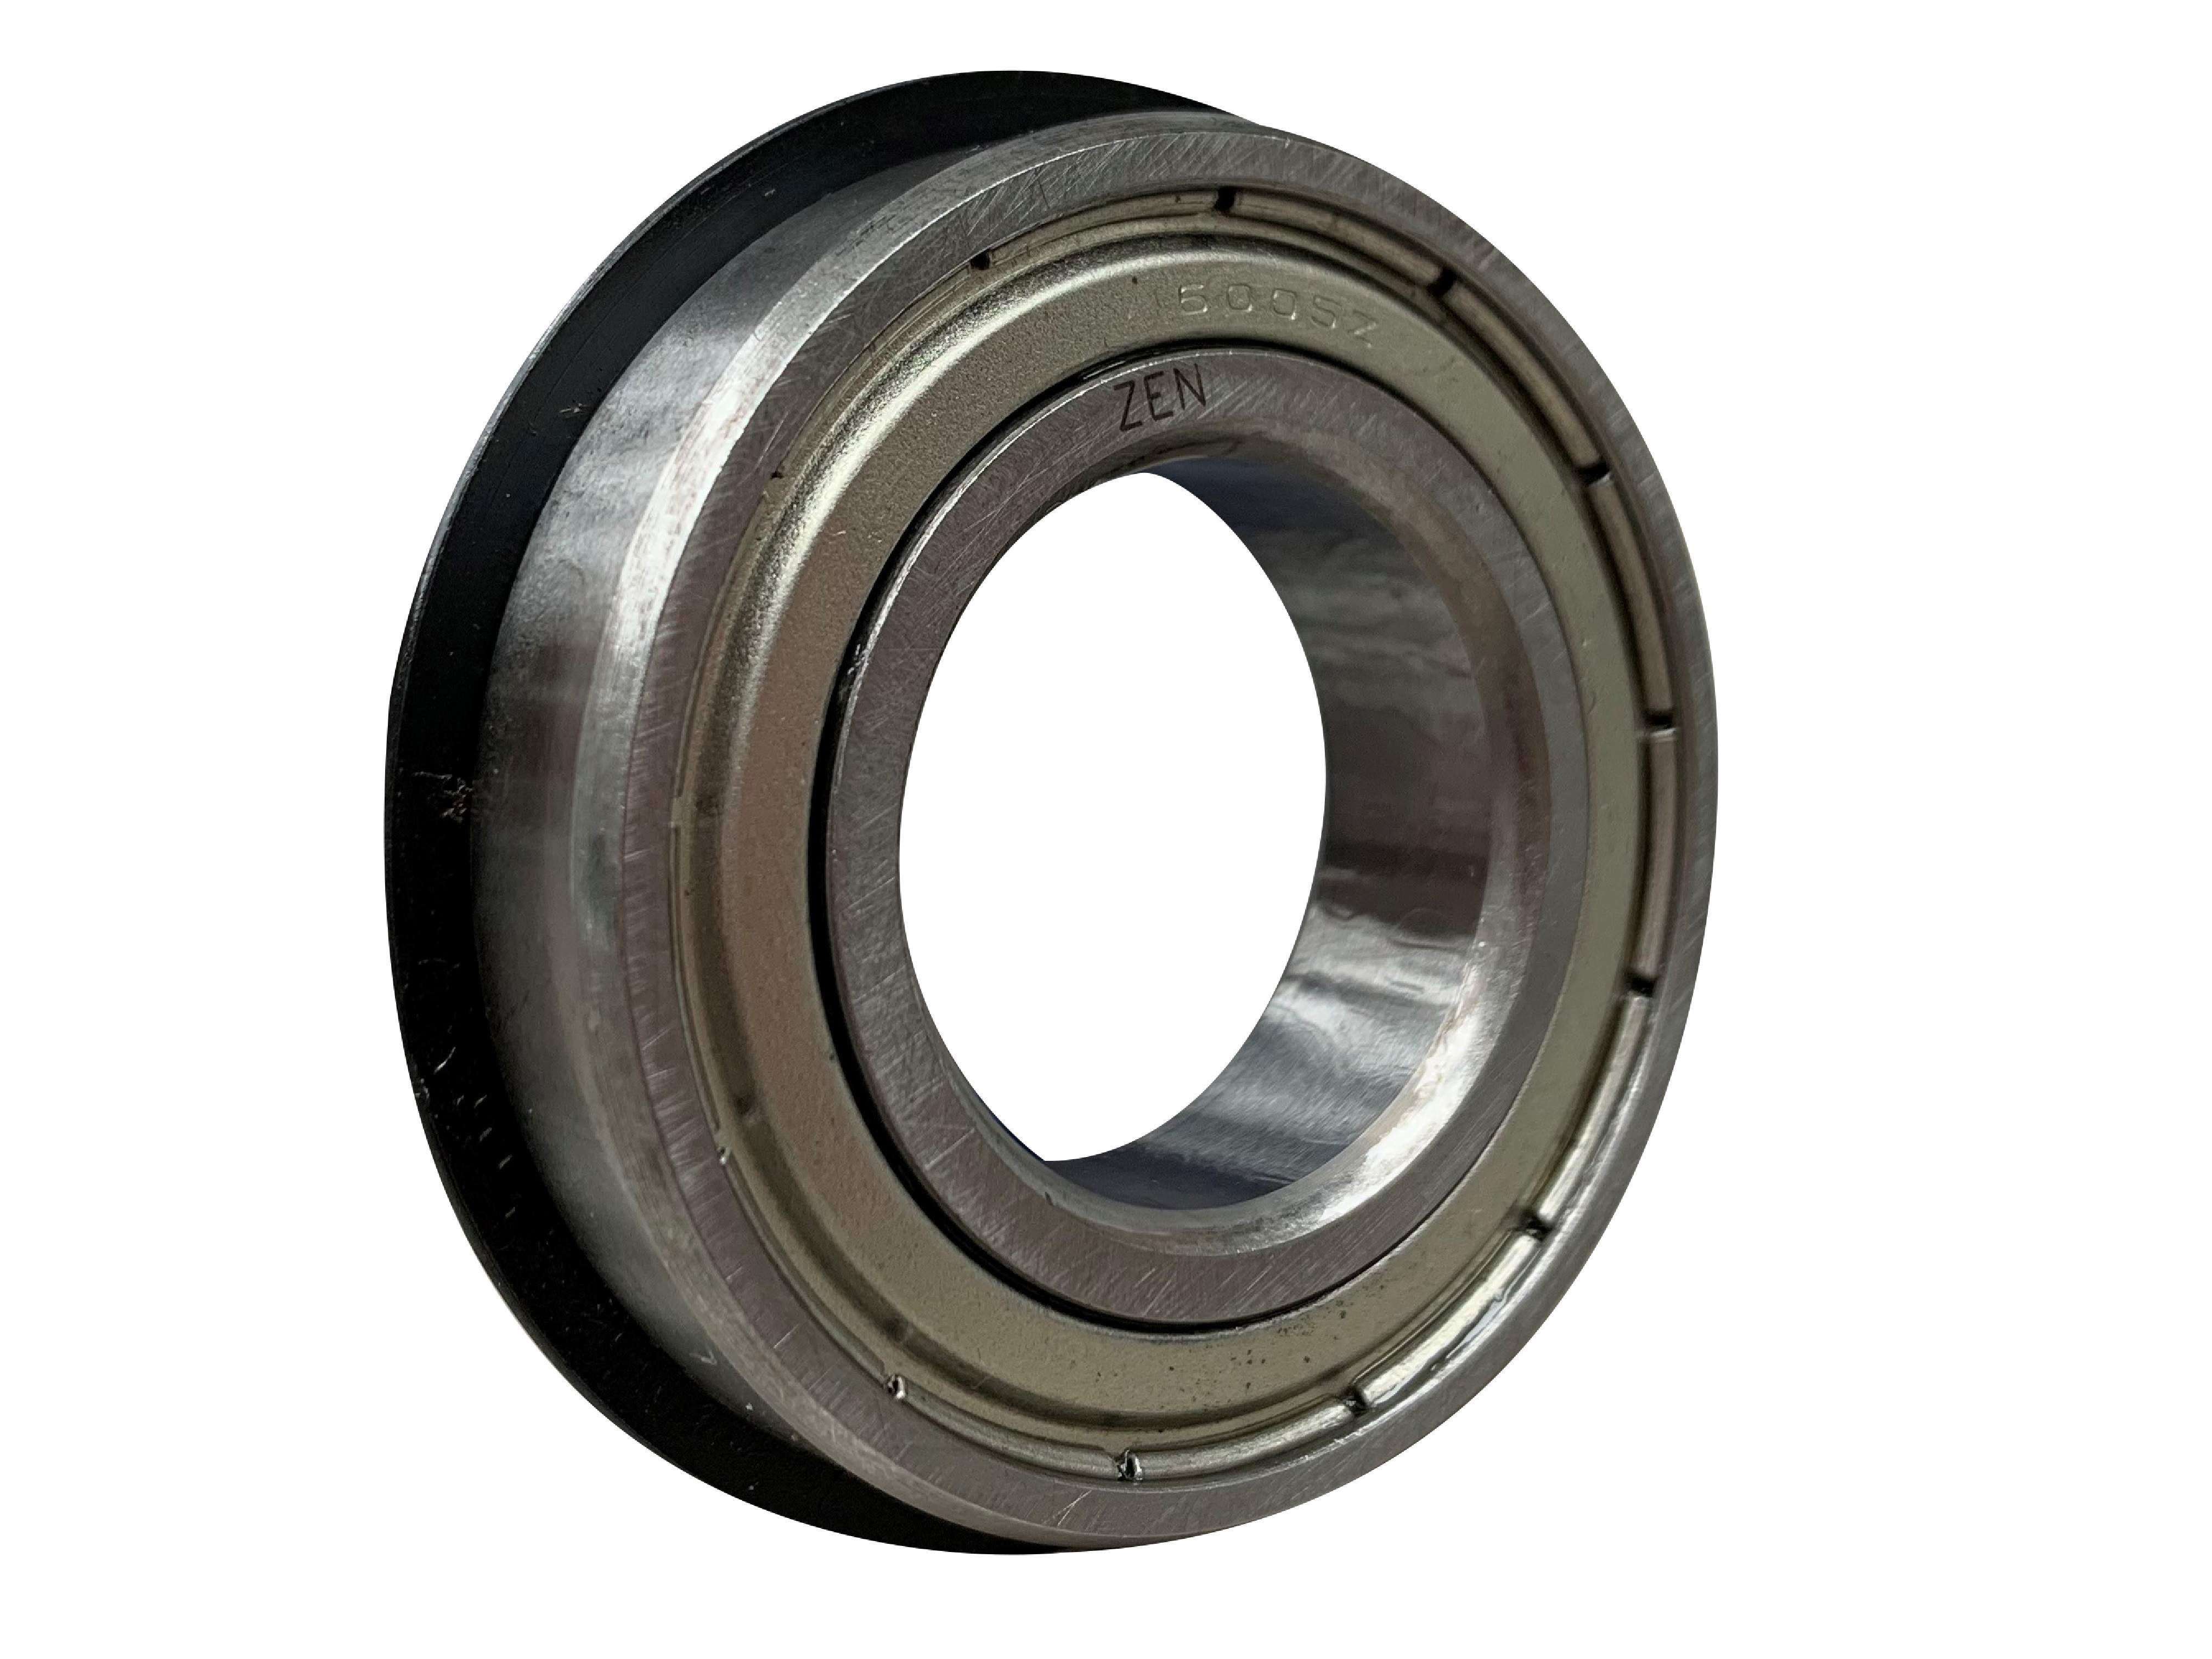 ZEN 6205-2Z-NR Shielded Ball Bearing With Snap Ring 25mm x 52mm x 15mm